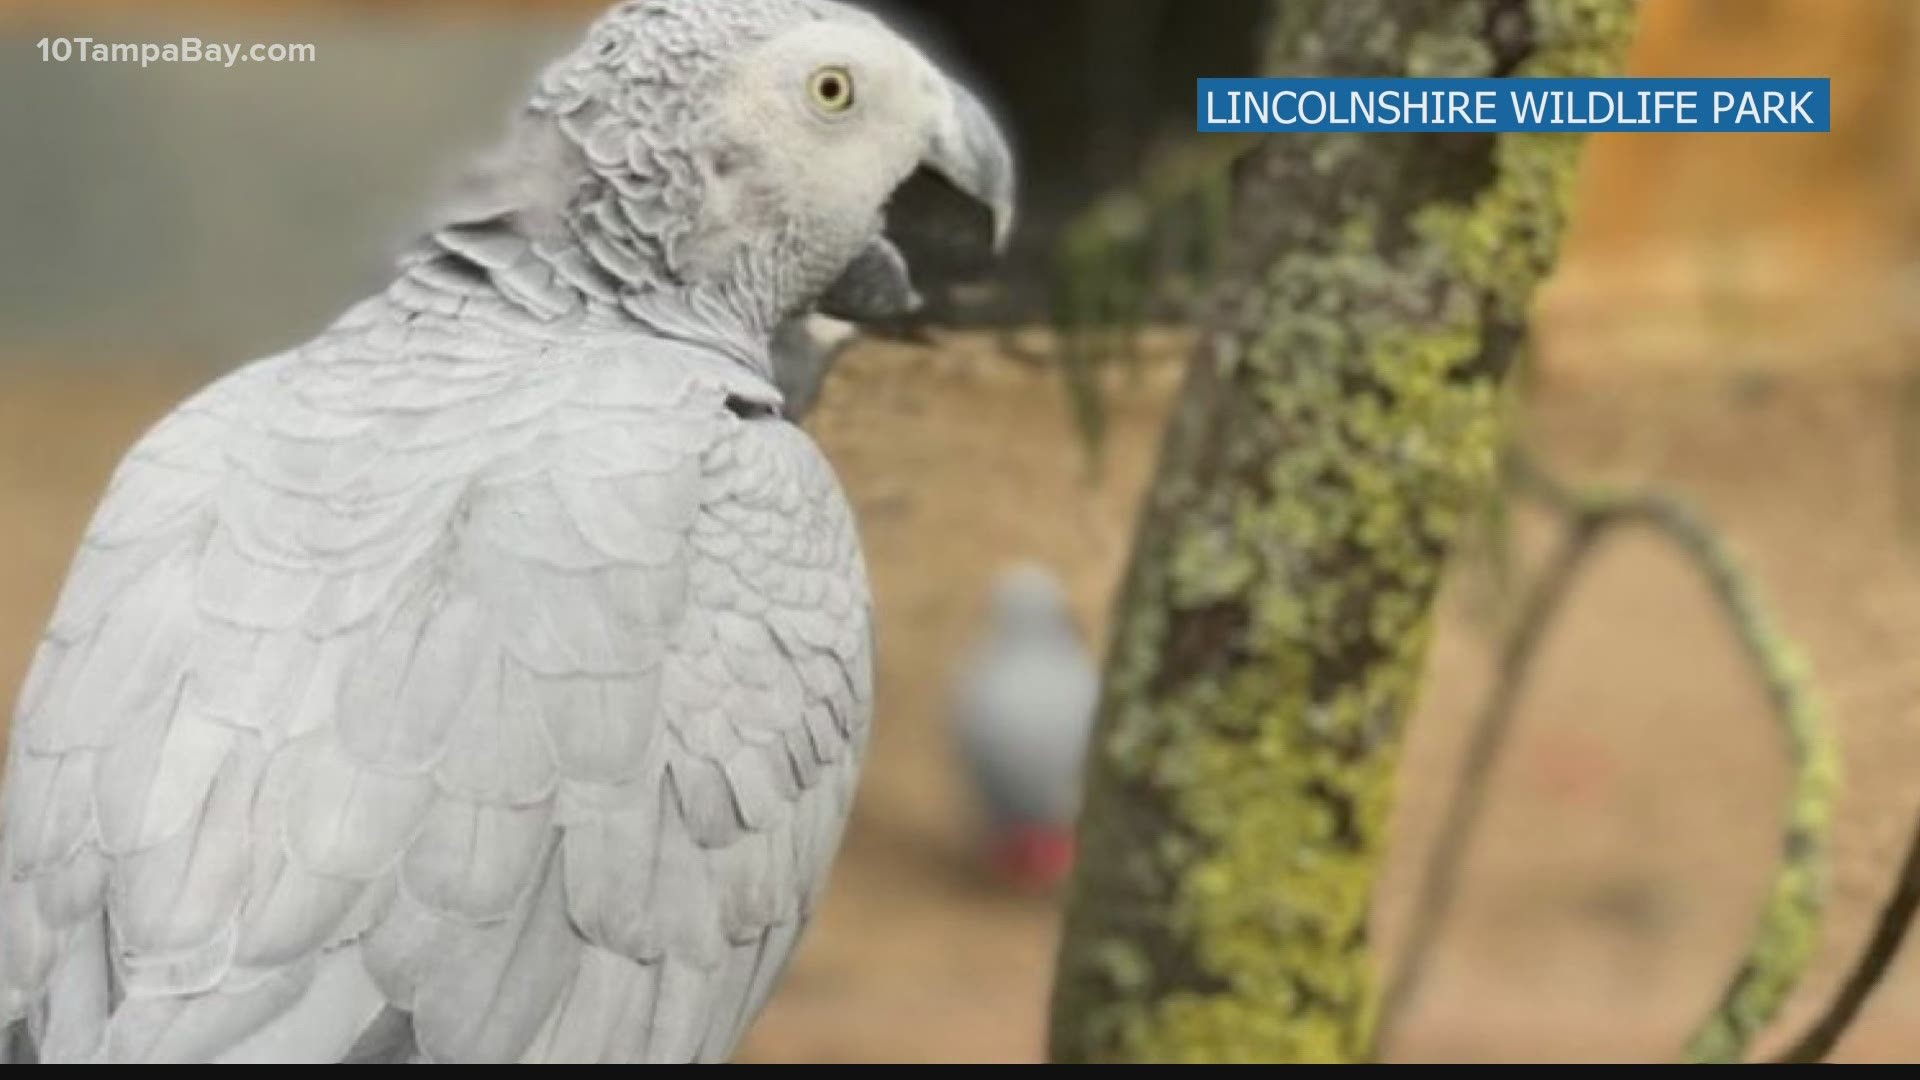 Swearing parrot removed from UK wildlife park